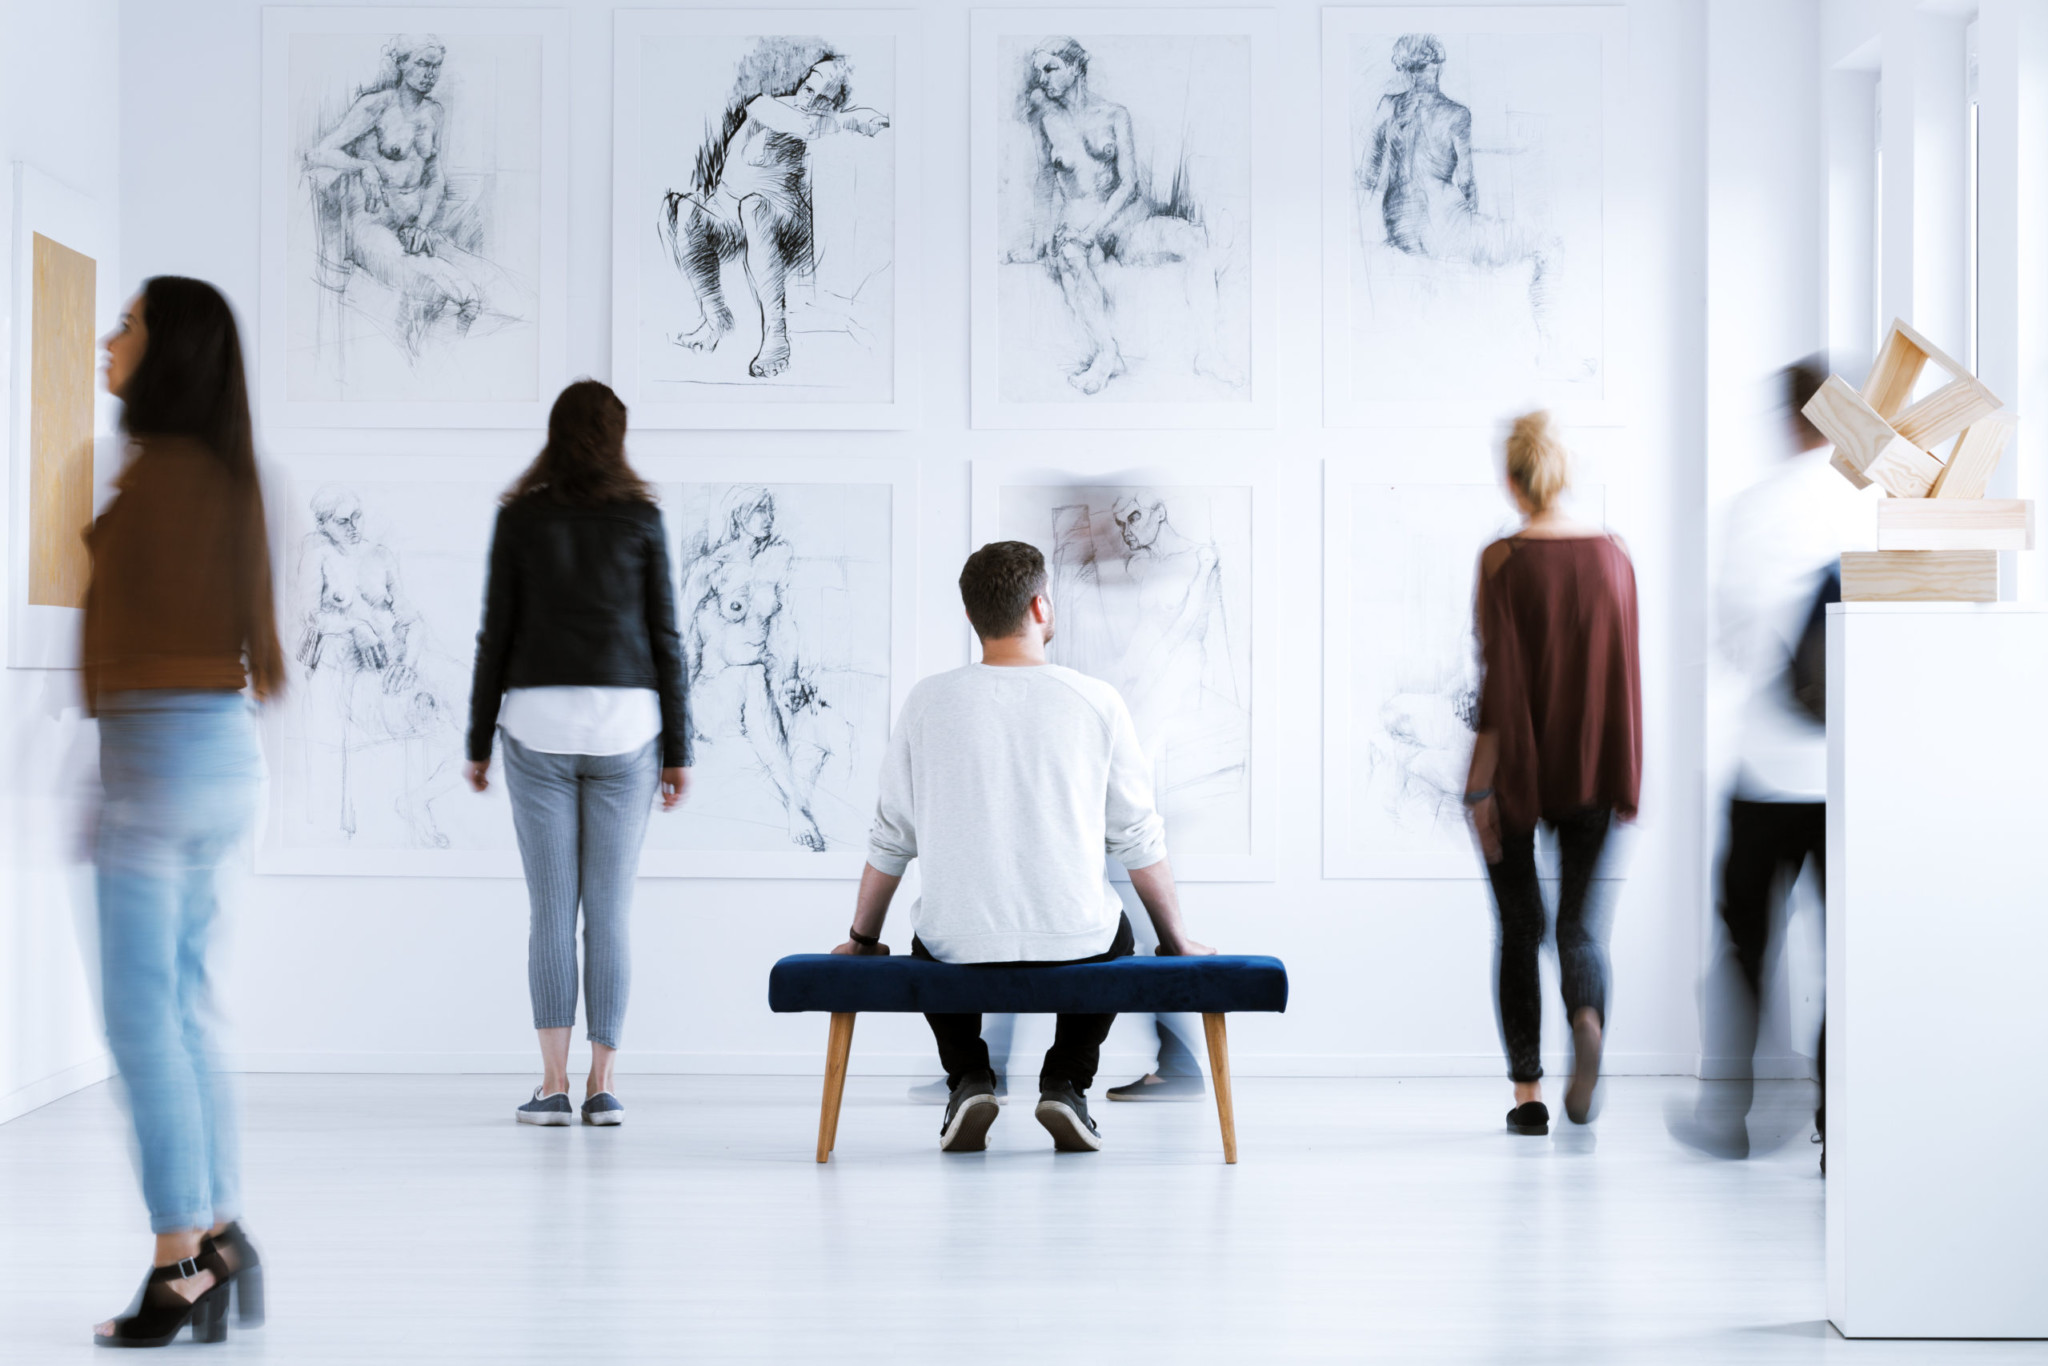 A group of people at an art gallery observing the sketches on display